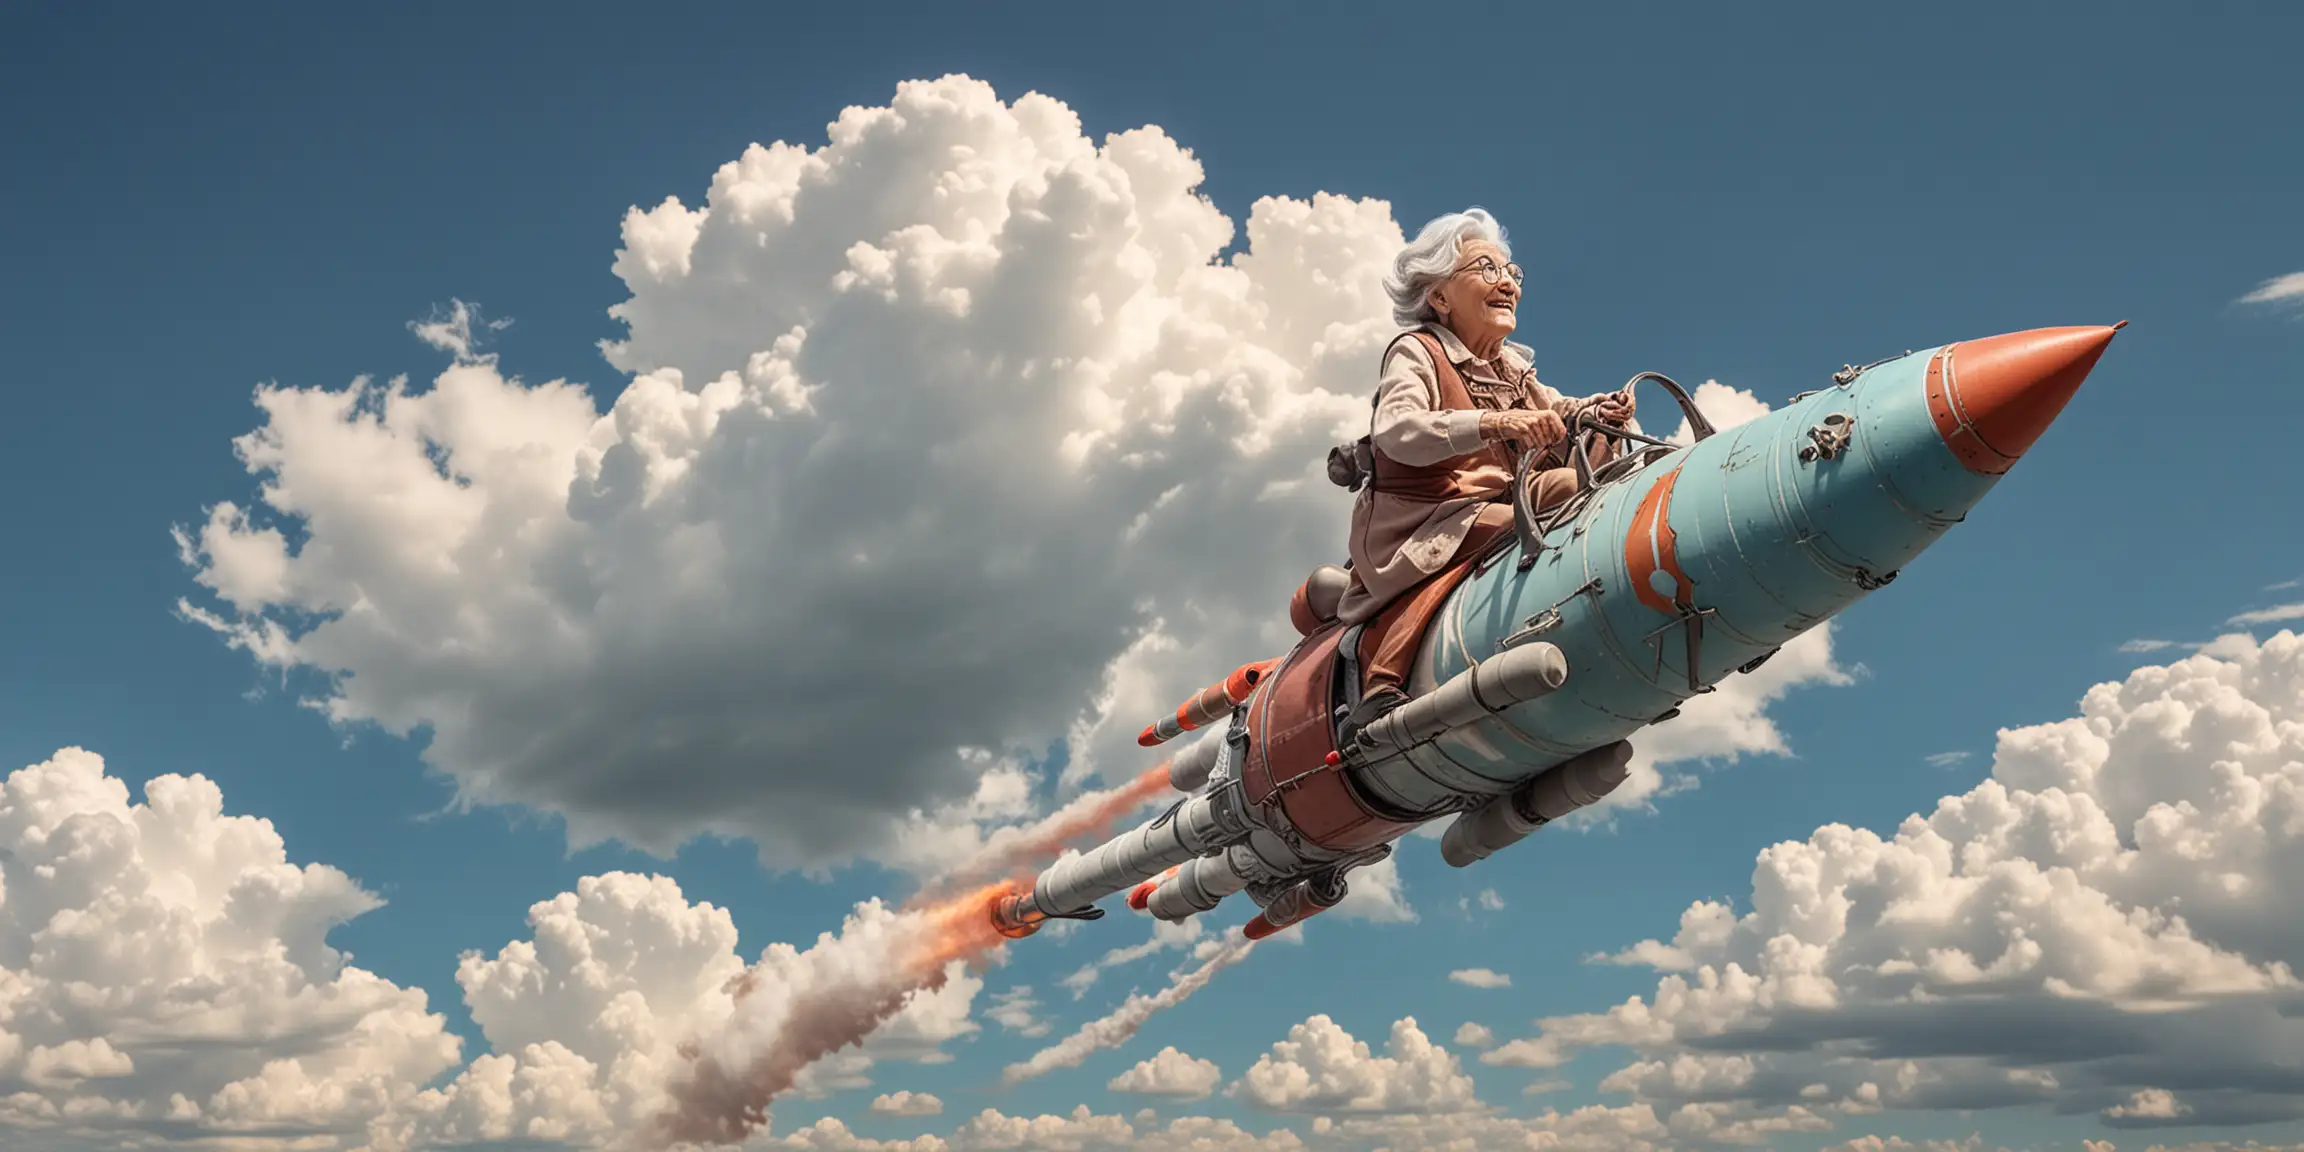 Elderly Woman with Silver Hair Soaring on Rocket Against Azure Sky with Fluffy Clouds